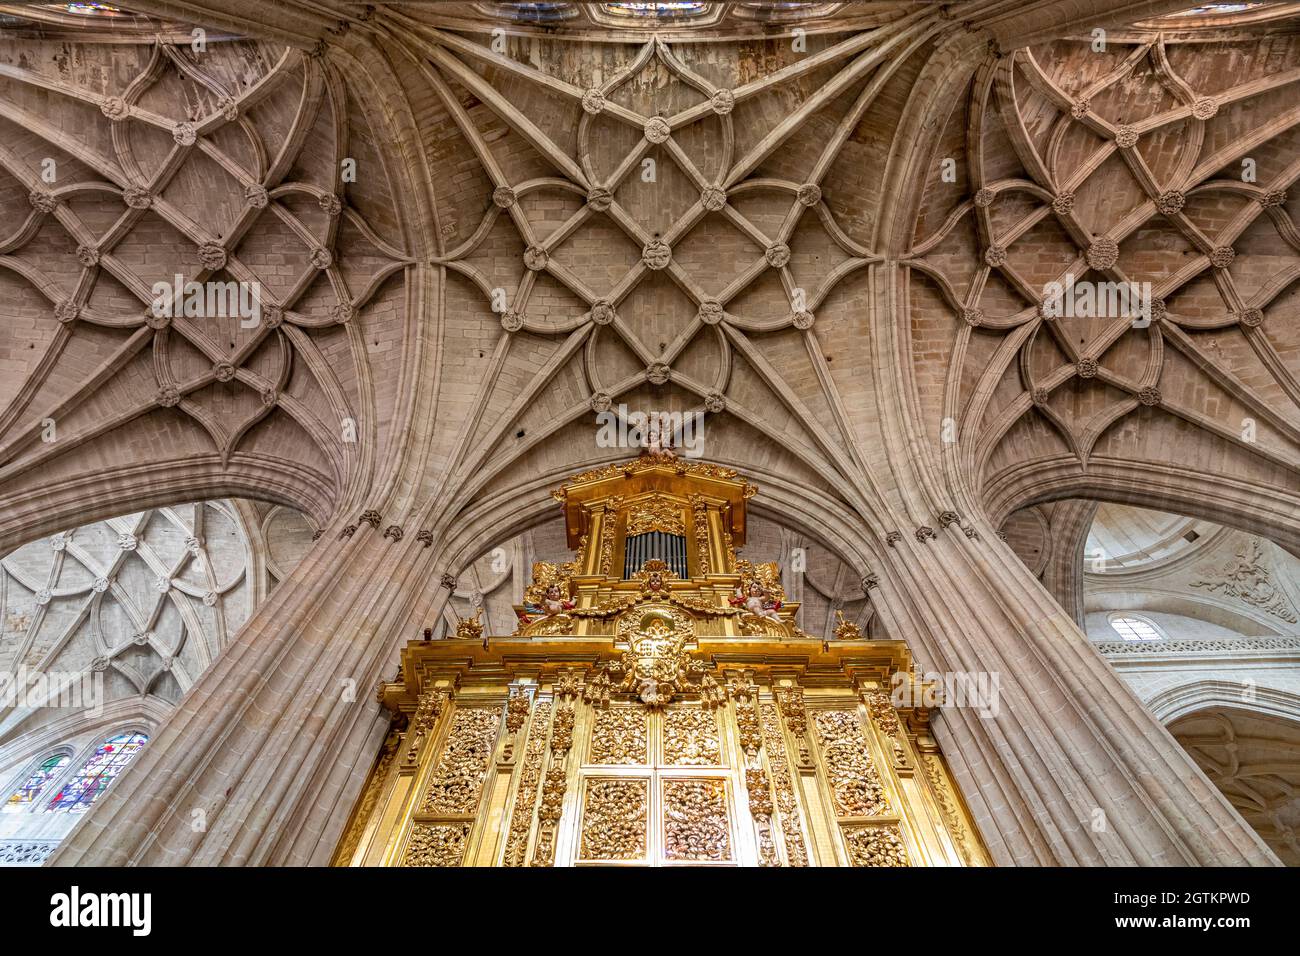 Segovia, Spain. Gothic ribbed vaults and organ at the nave inside Segovia Cathedral Stock Photo